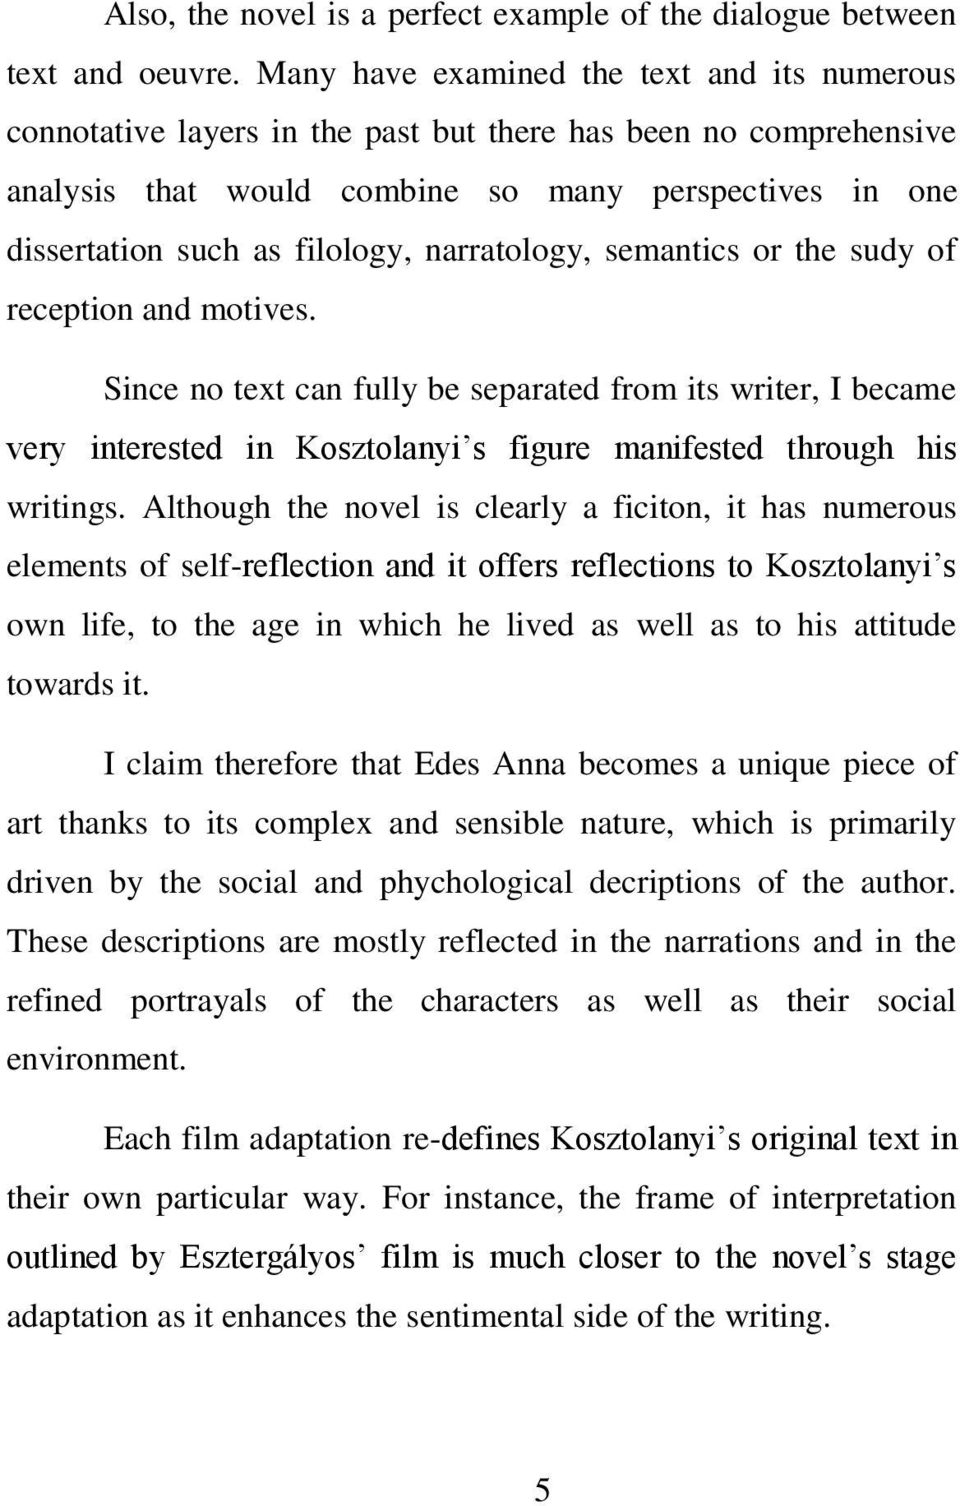 narratology, semantics or the sudy of reception and motives. Since no text can fully be separated from its writer, I became very interested in Kosztolanyi s figure manifested through his writings.